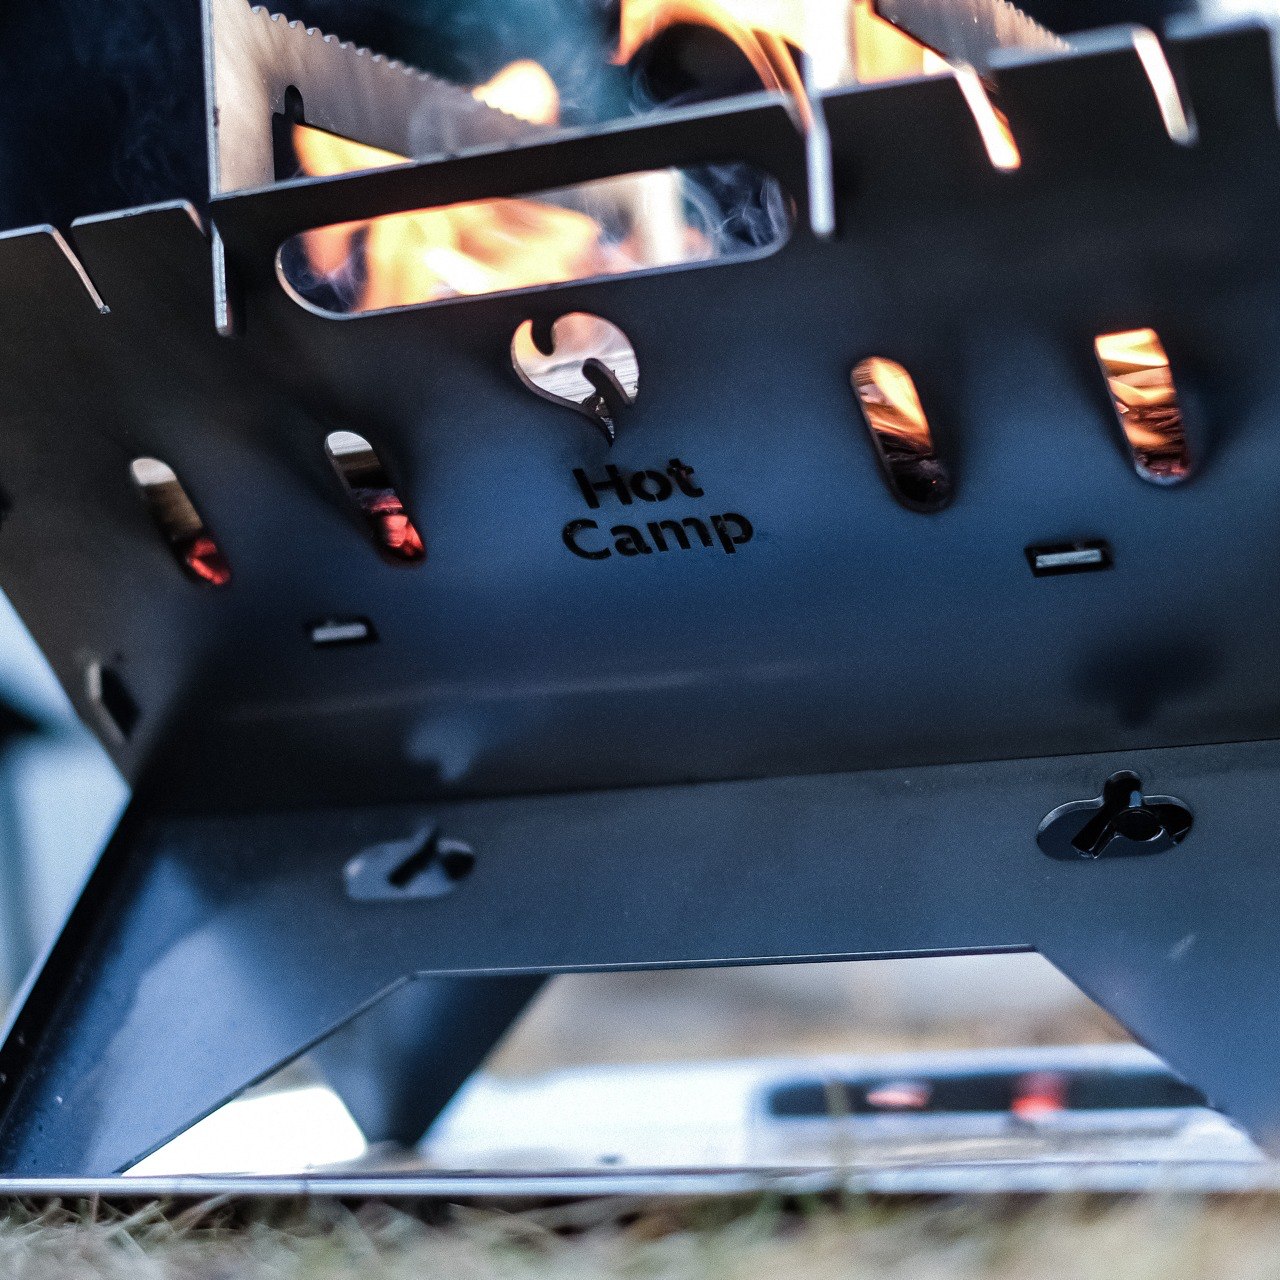 This foldable fire pit stand brings the joy of space-saving design to outdoor camping and meals